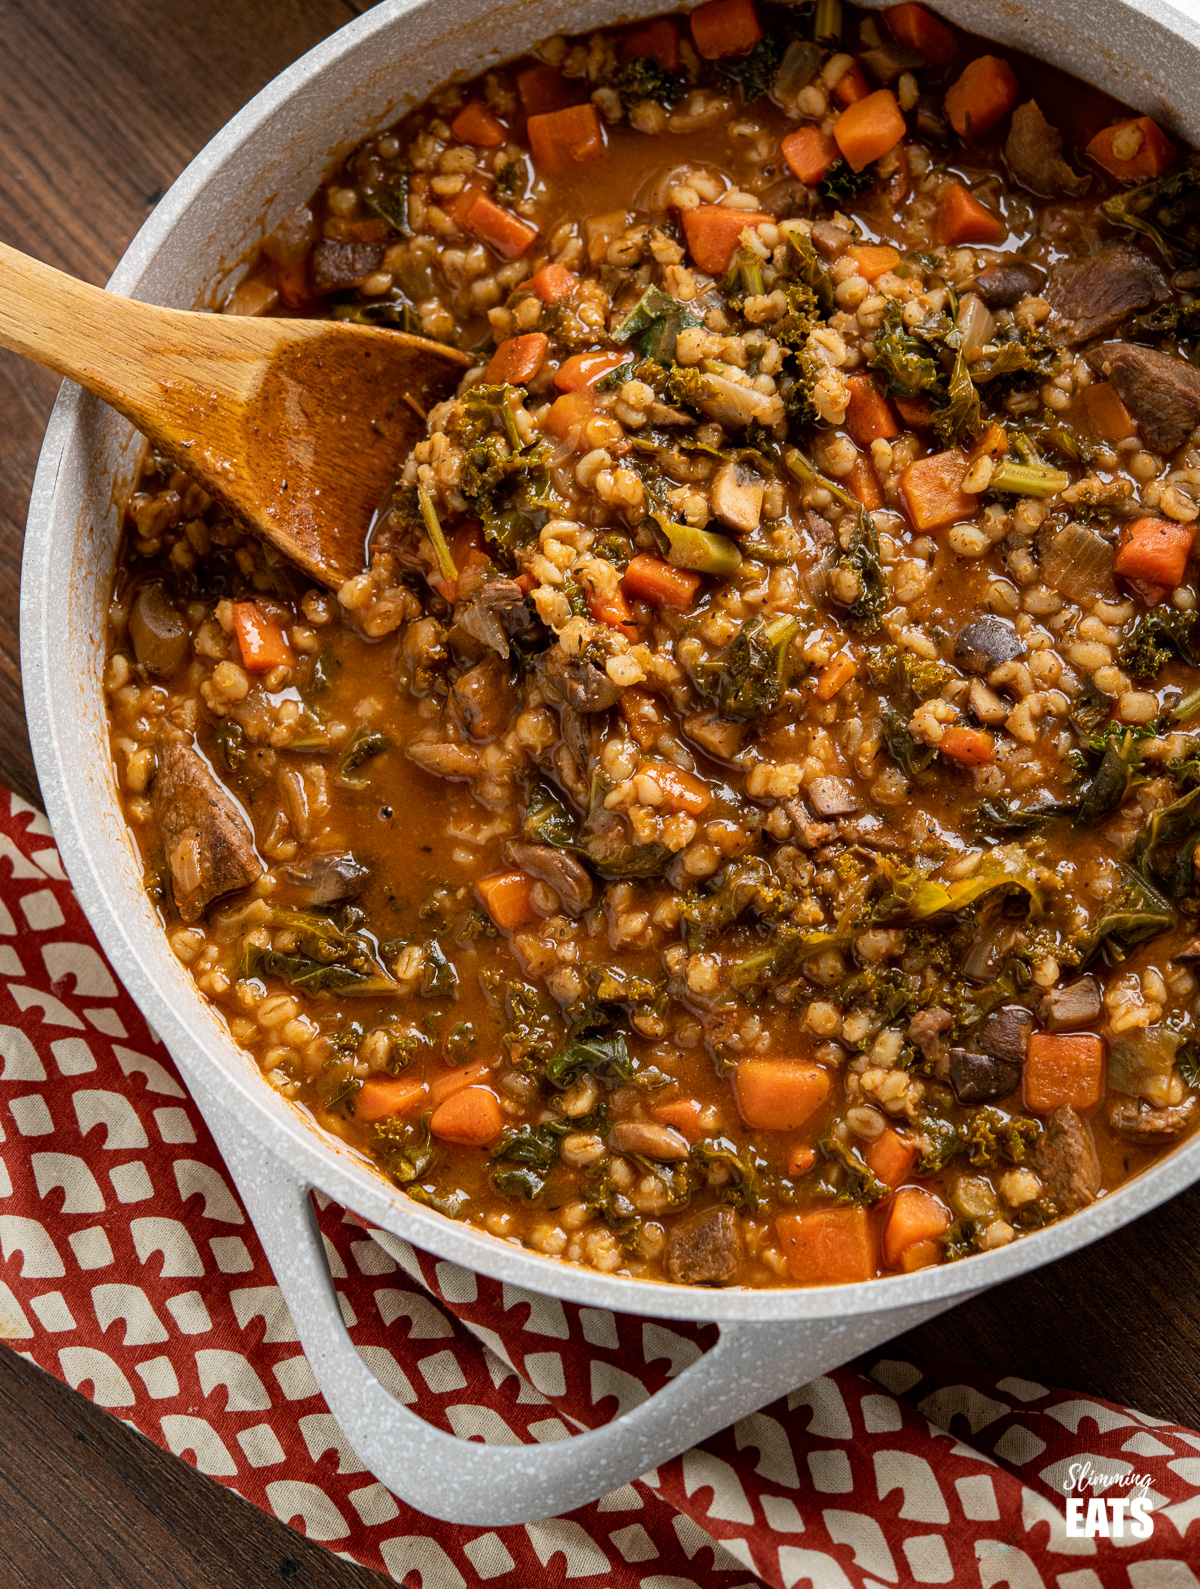 Hearty Beef and Barley Stew | Slimming Eats Recipes